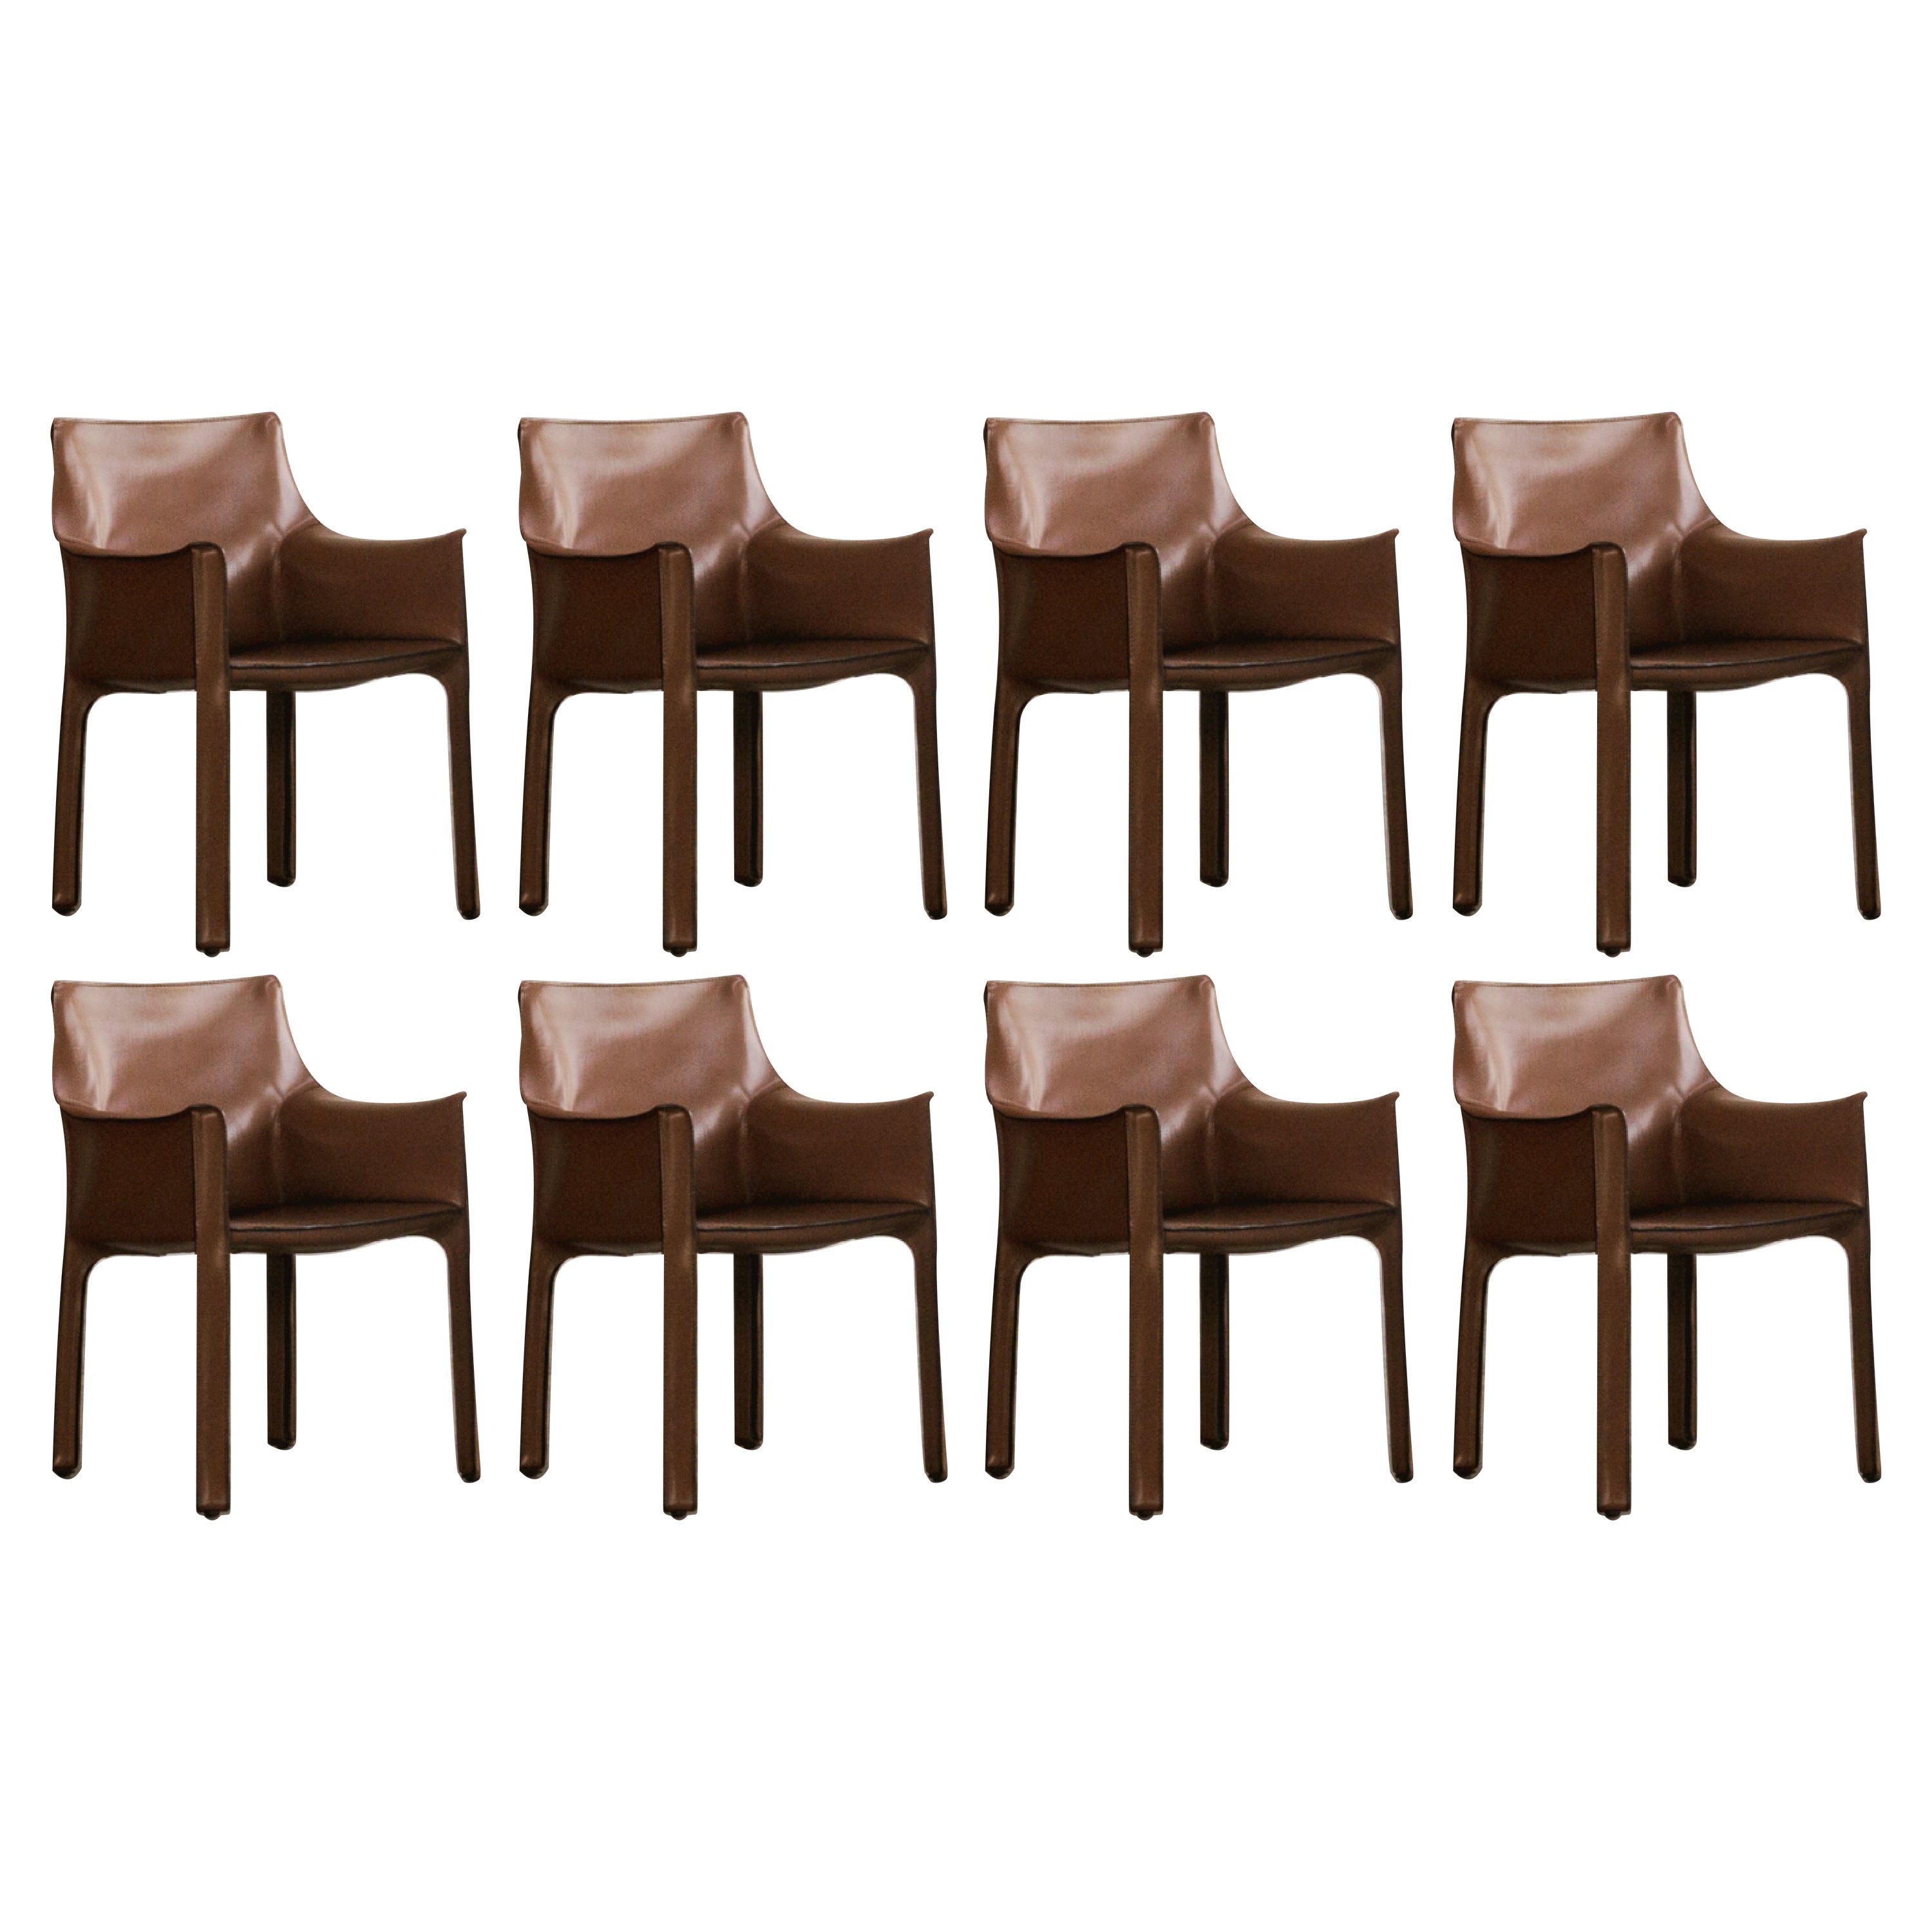 Mario Bellini "CAB 413" Chairs for Cassina in Light Brown, 1977, Set of 8